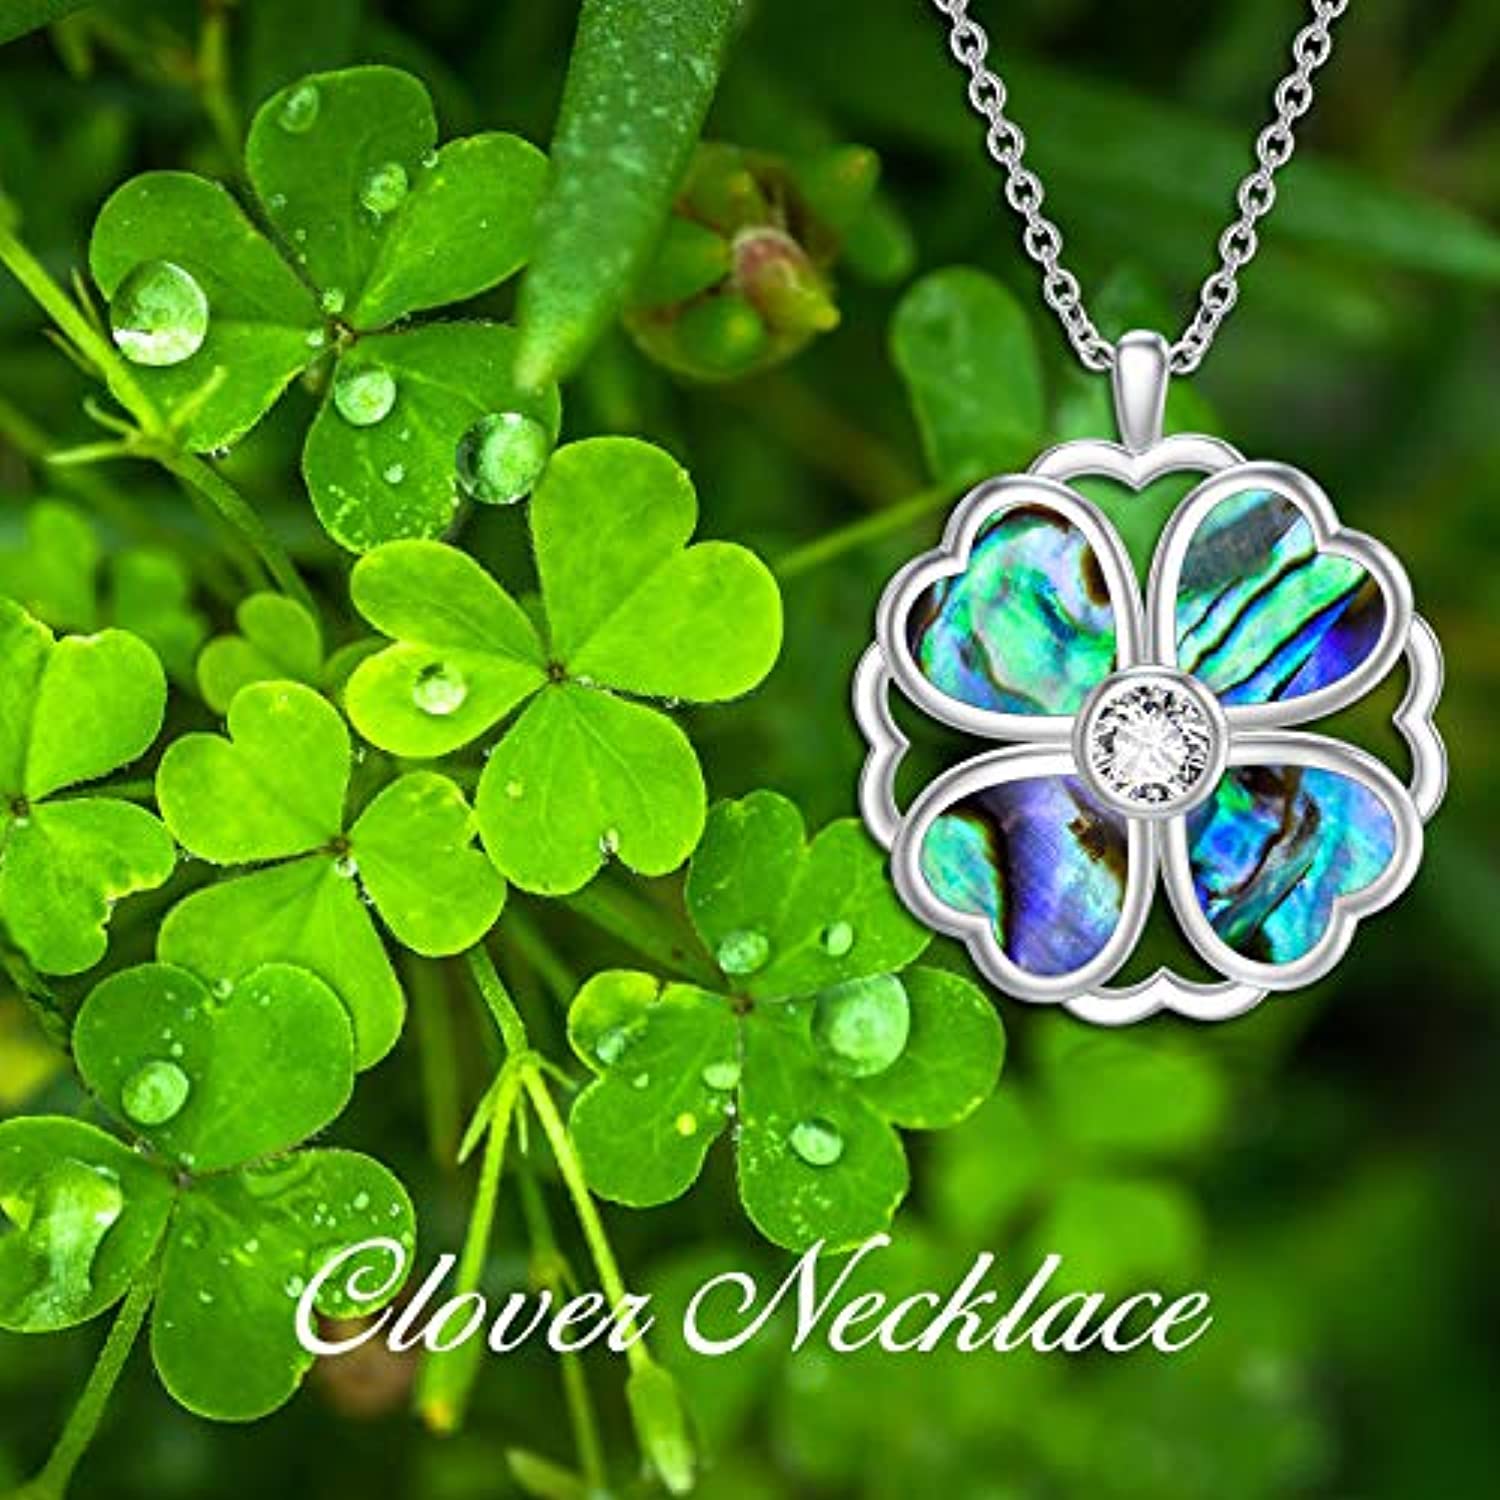 Mother of Pearl 4 Leaf Clover Necklace Pendant Sterling Silver 